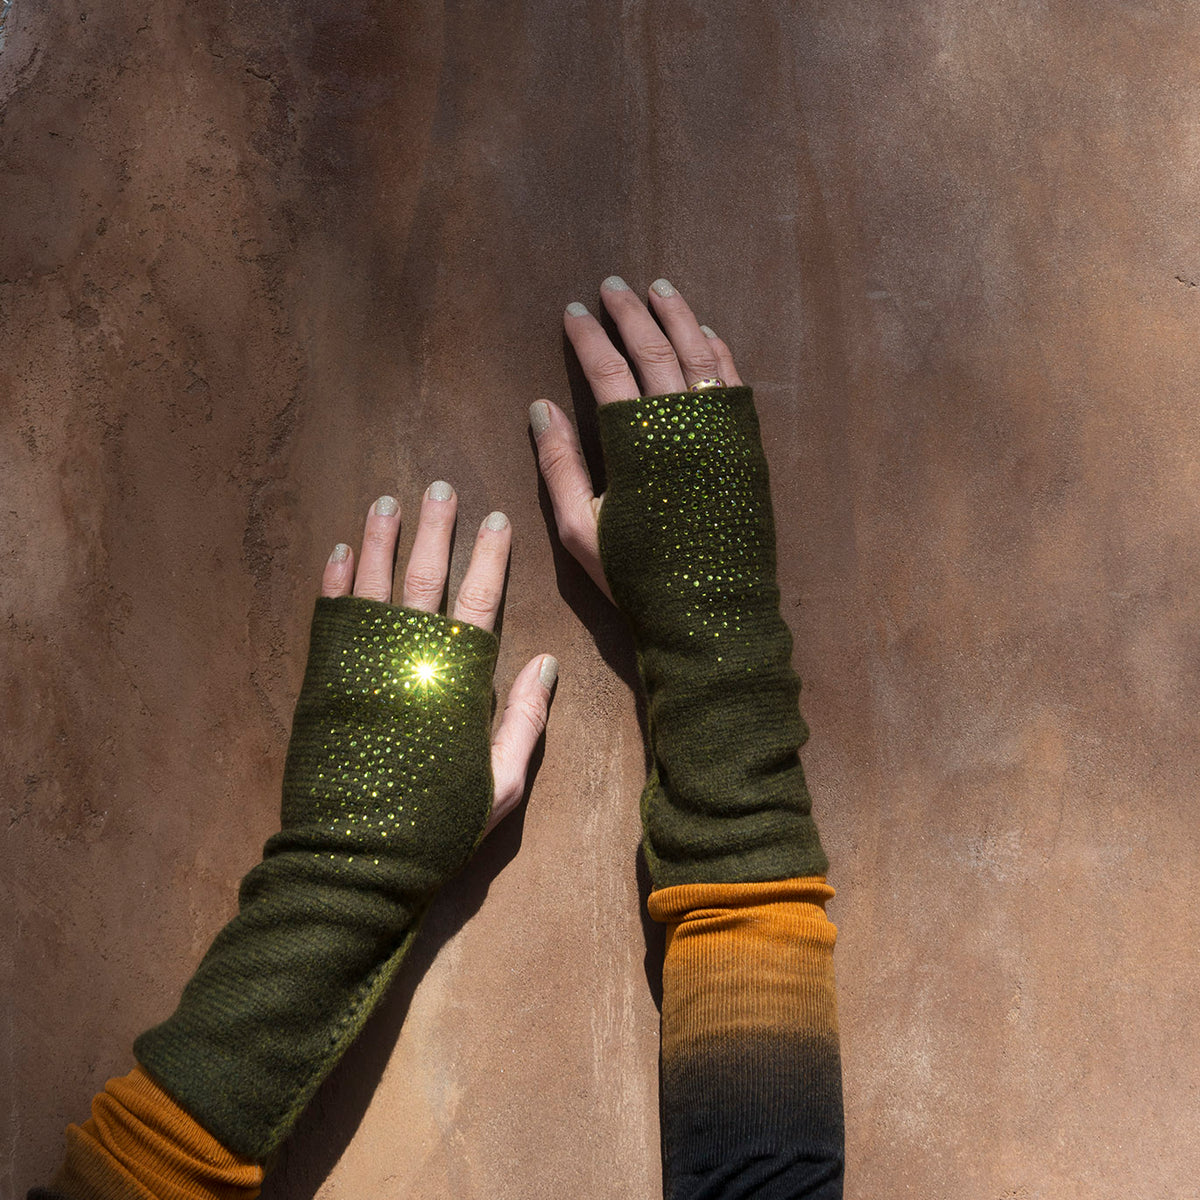 Hands modeling Olive colored Mid Length Hydra Fingerless Gloves. editorial-image